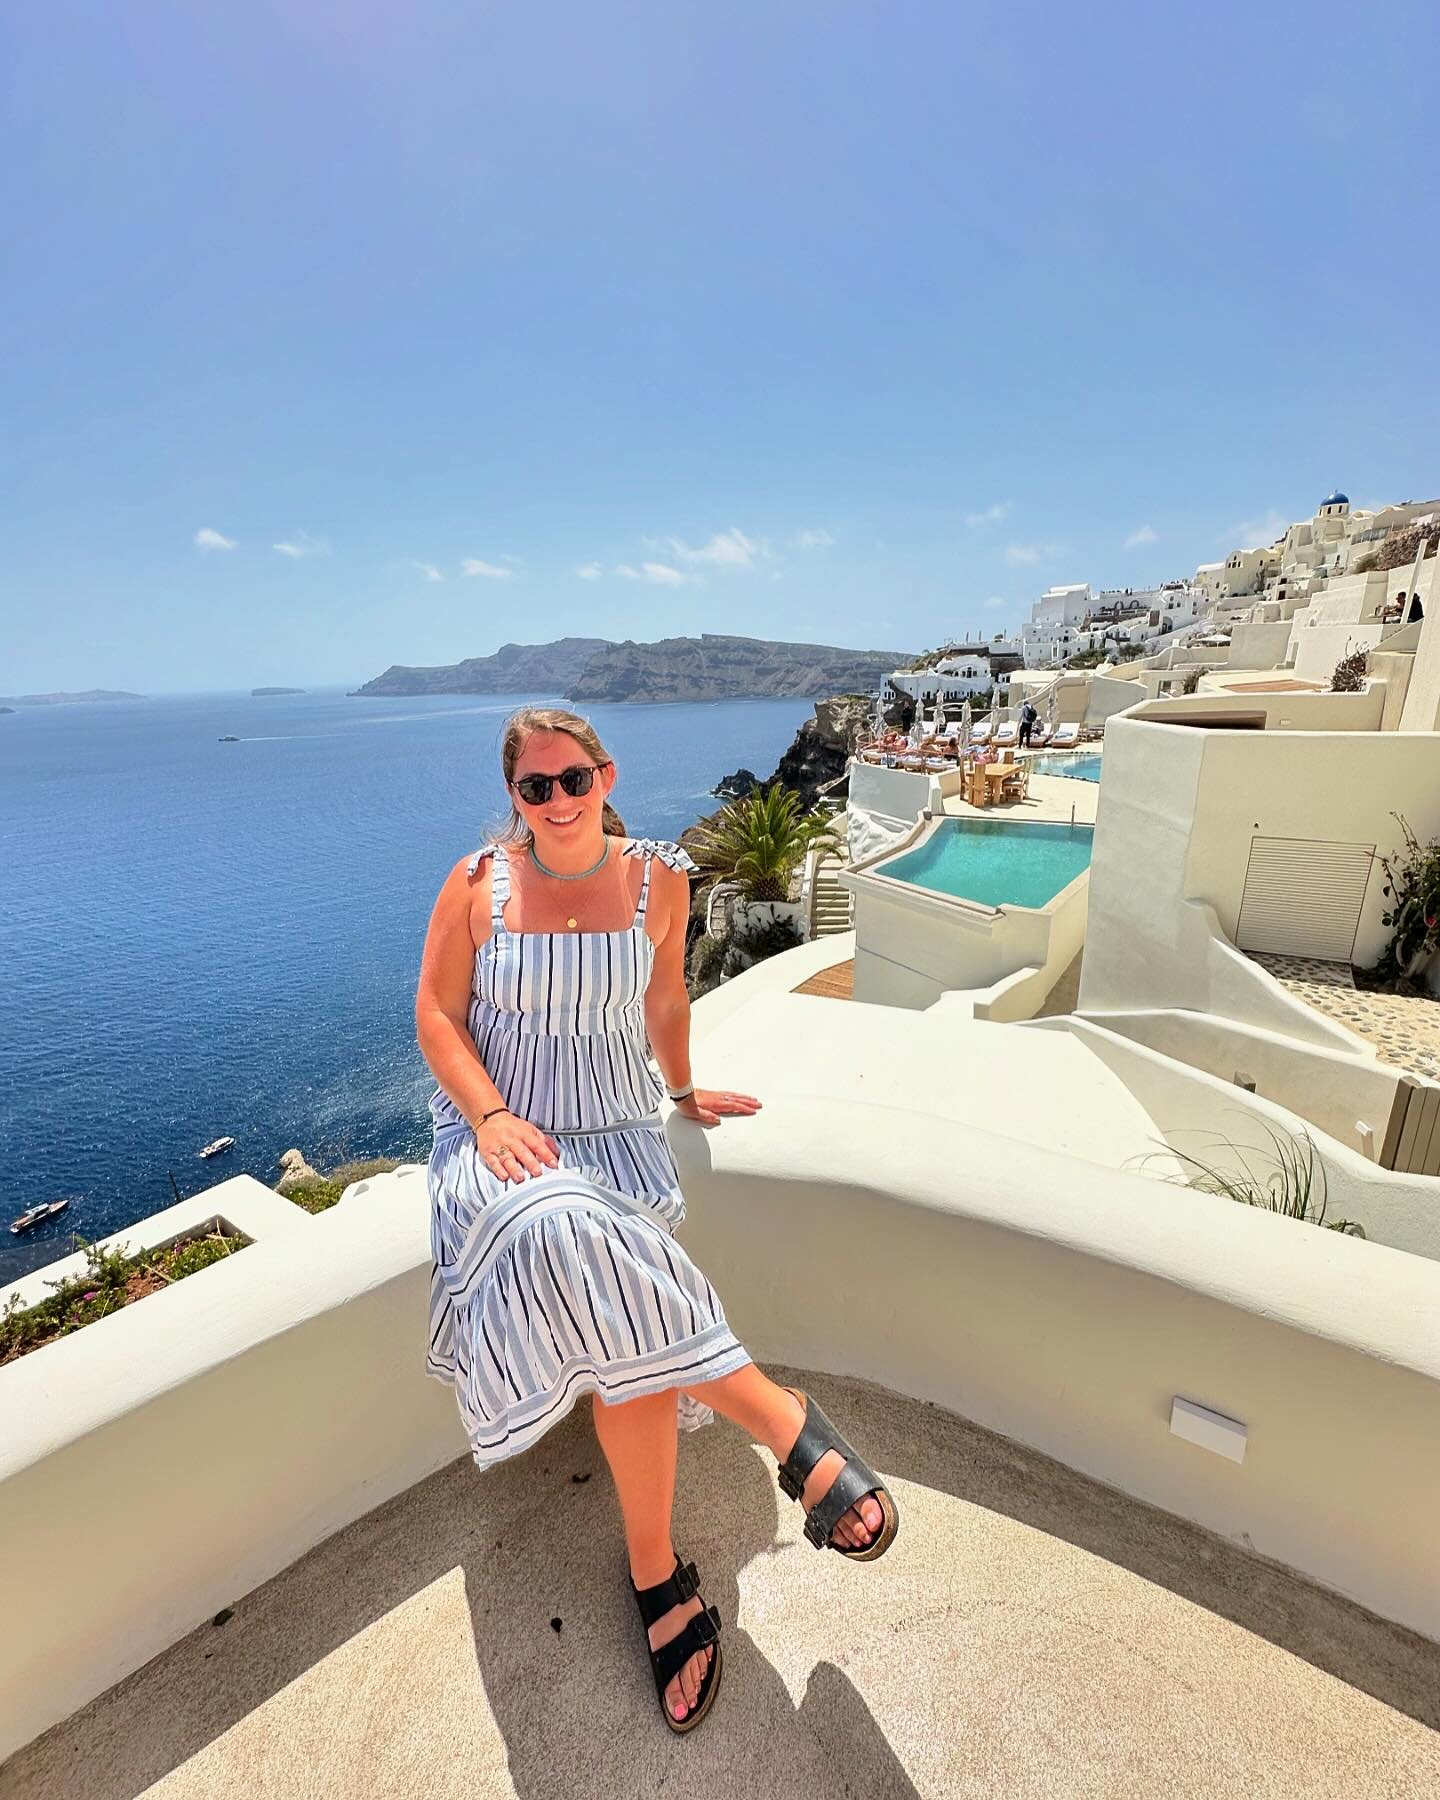 📍SANTORINI

Next up: the eternal crowd favorite, Santorini!

Santorini is a highly unique island, known for its whitewashed buildings and blue-domed churches overlooking dramatic cliffs and stunning sunsets! The iconic caldera was formed by one of t